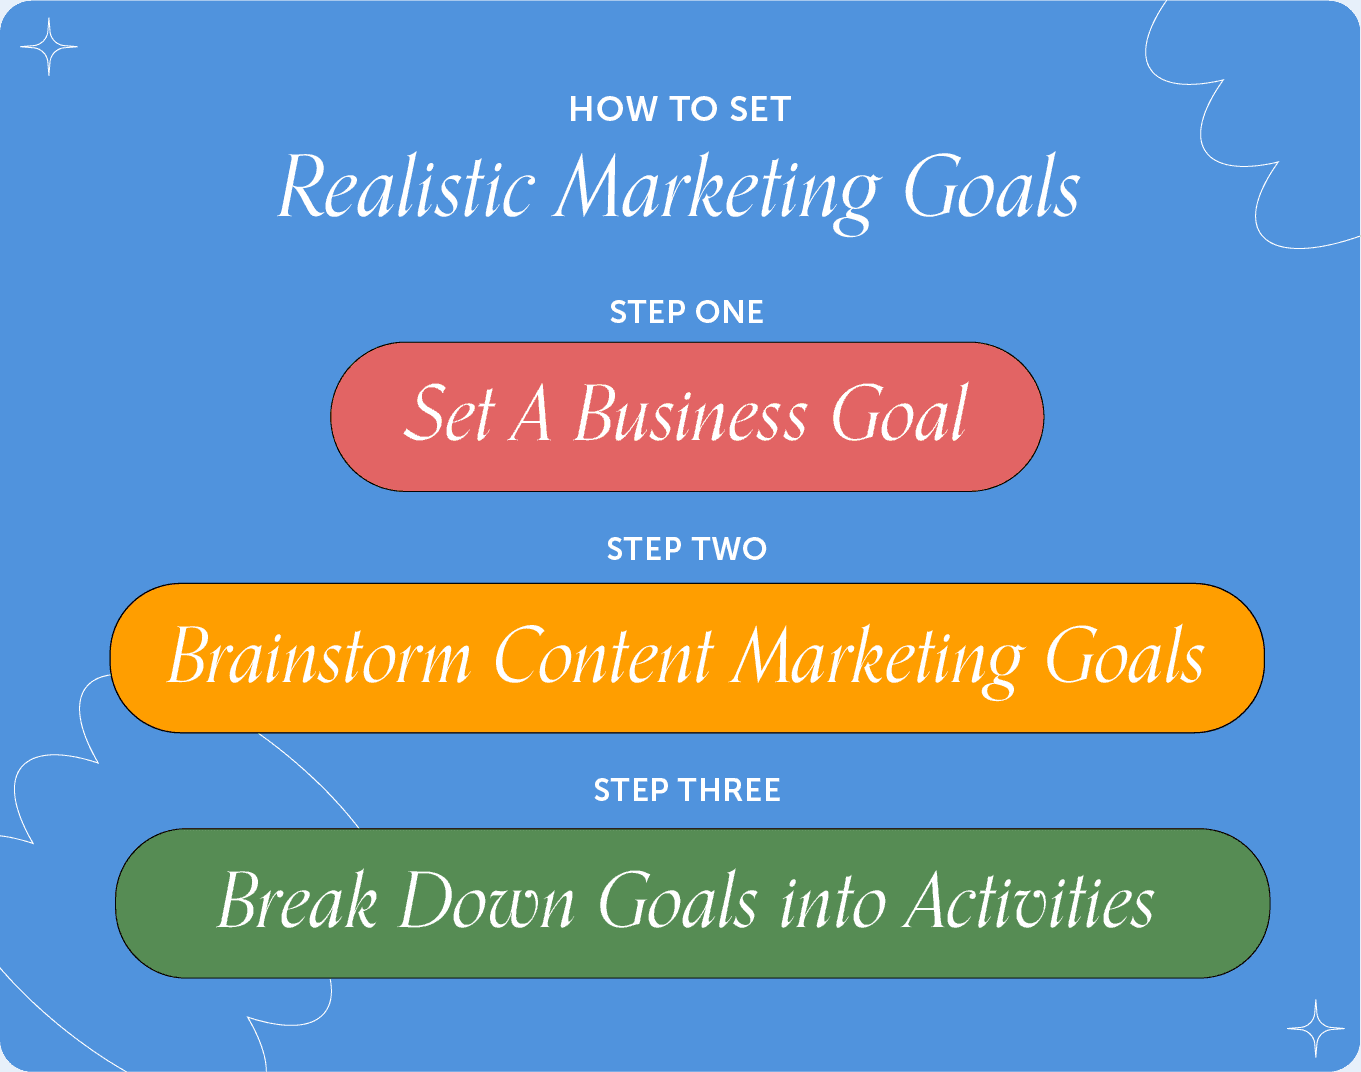 The three steps of realistic marketing goals are to first, set a business goal, then brainstorm content marketing goals, and lastly break down goals into activities.